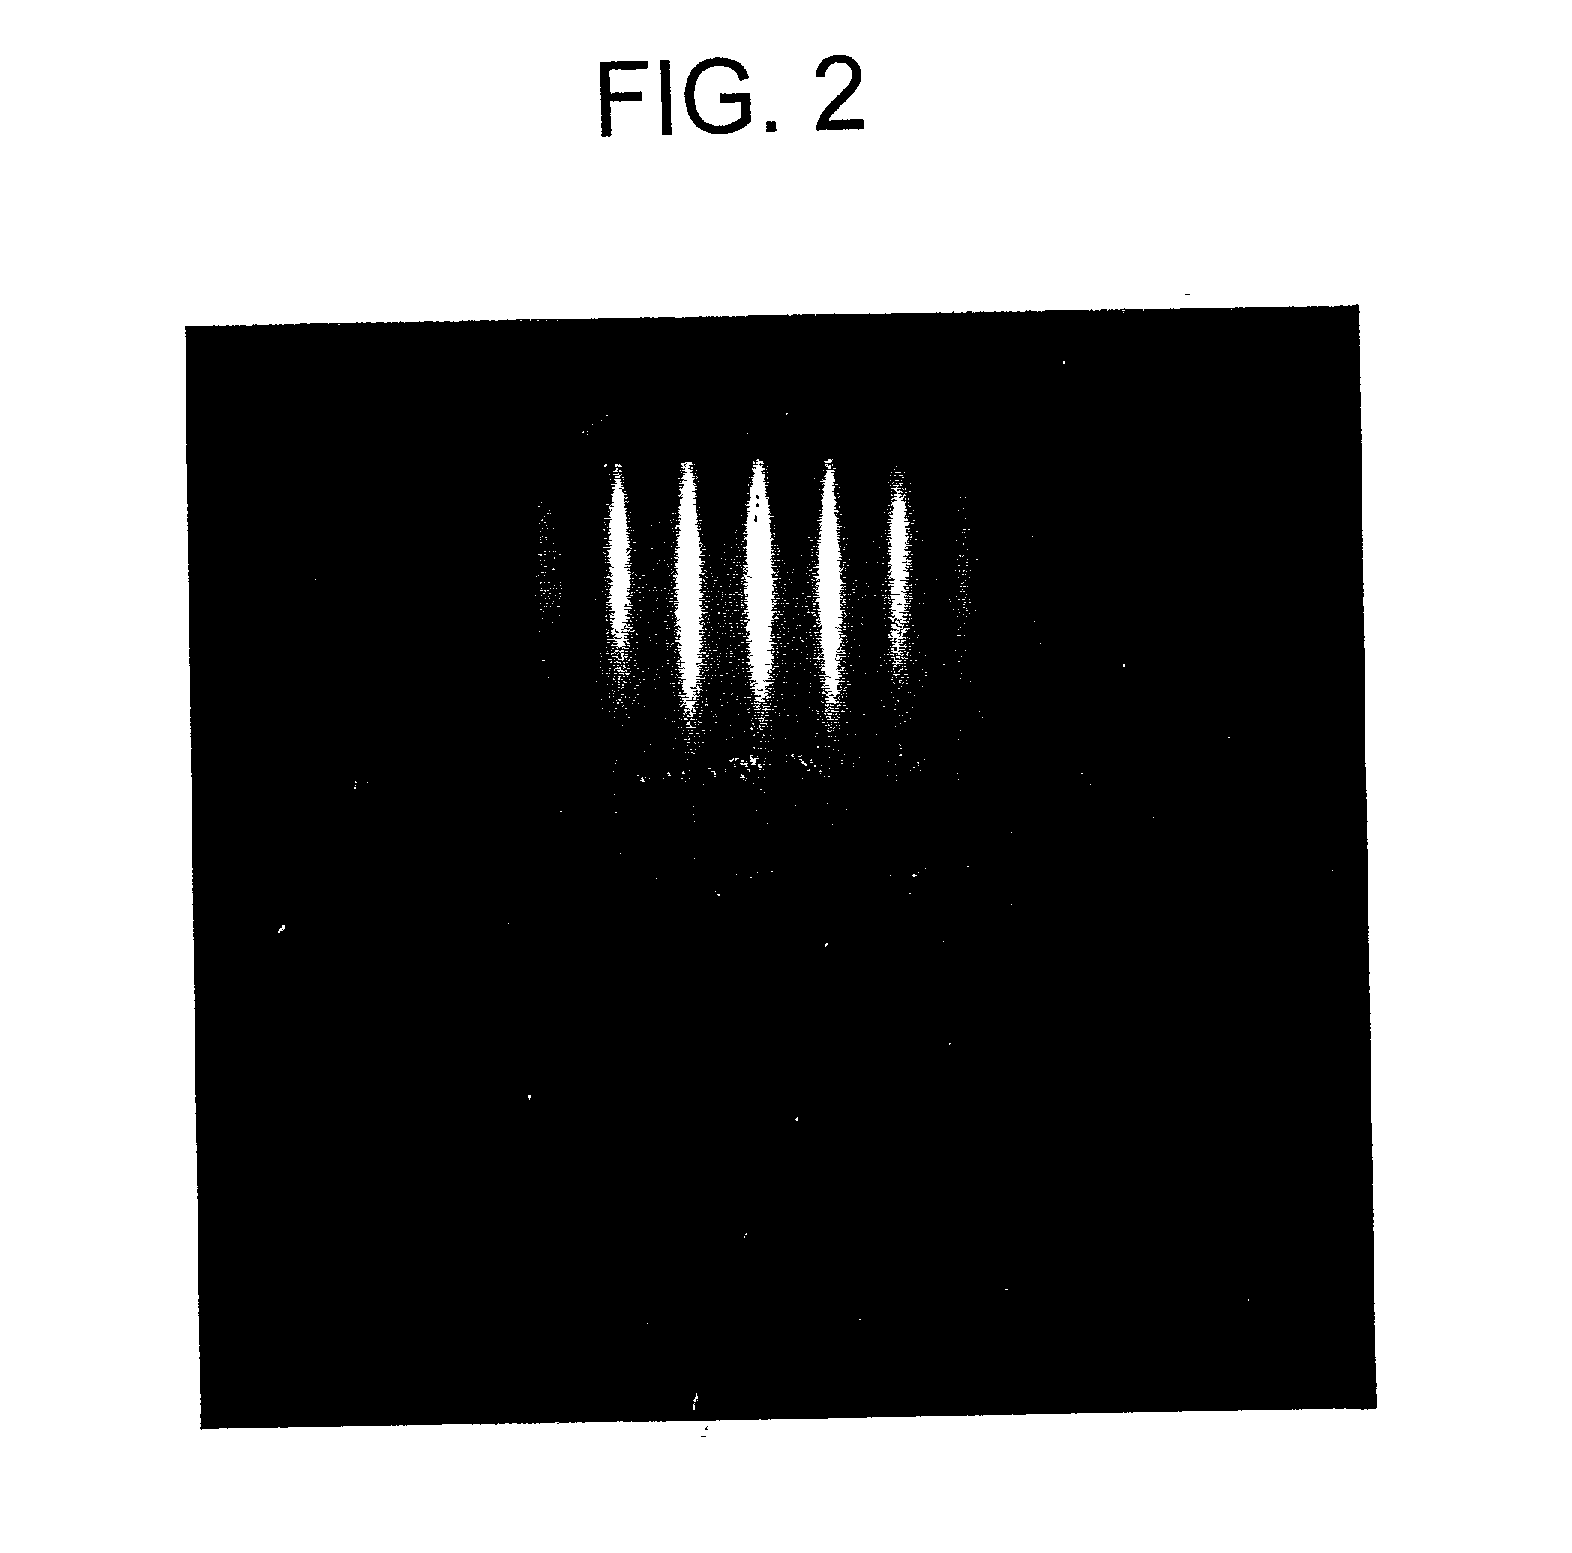 Multilayer thin film and its fabrication process as well as electron device